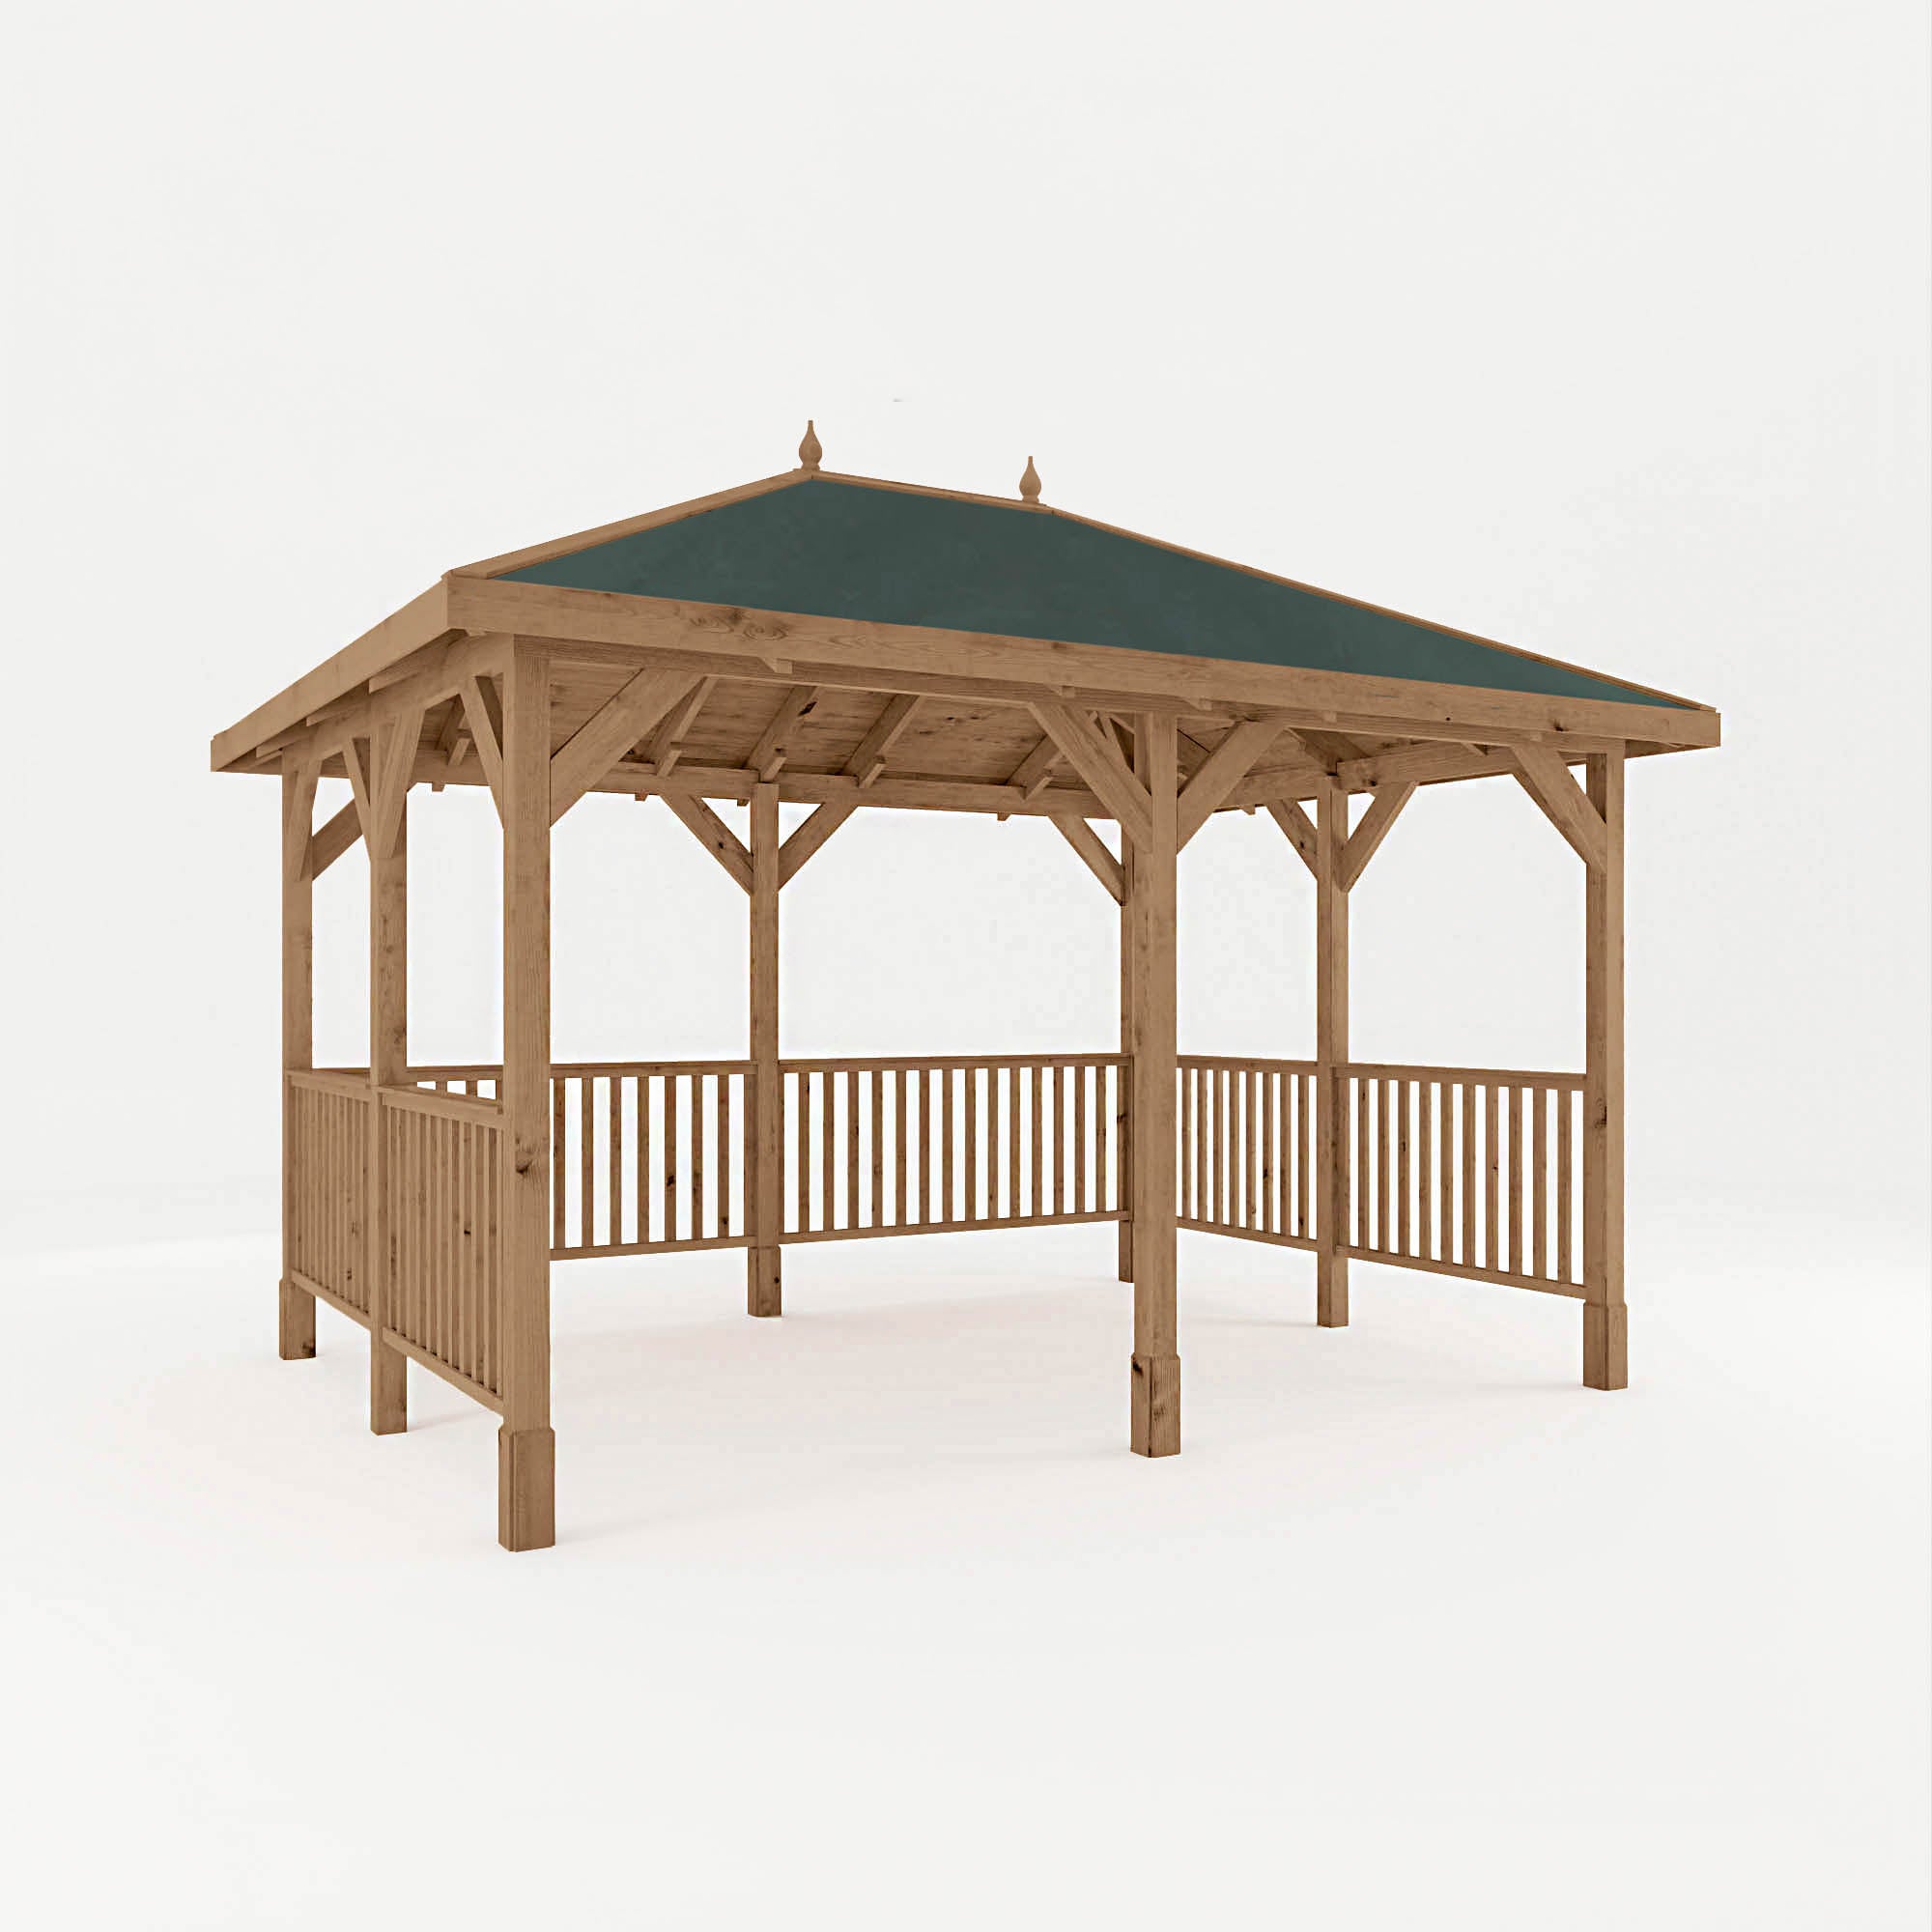 3m x 4m Pressure Treated Gazebo with Roof and Framed Rails